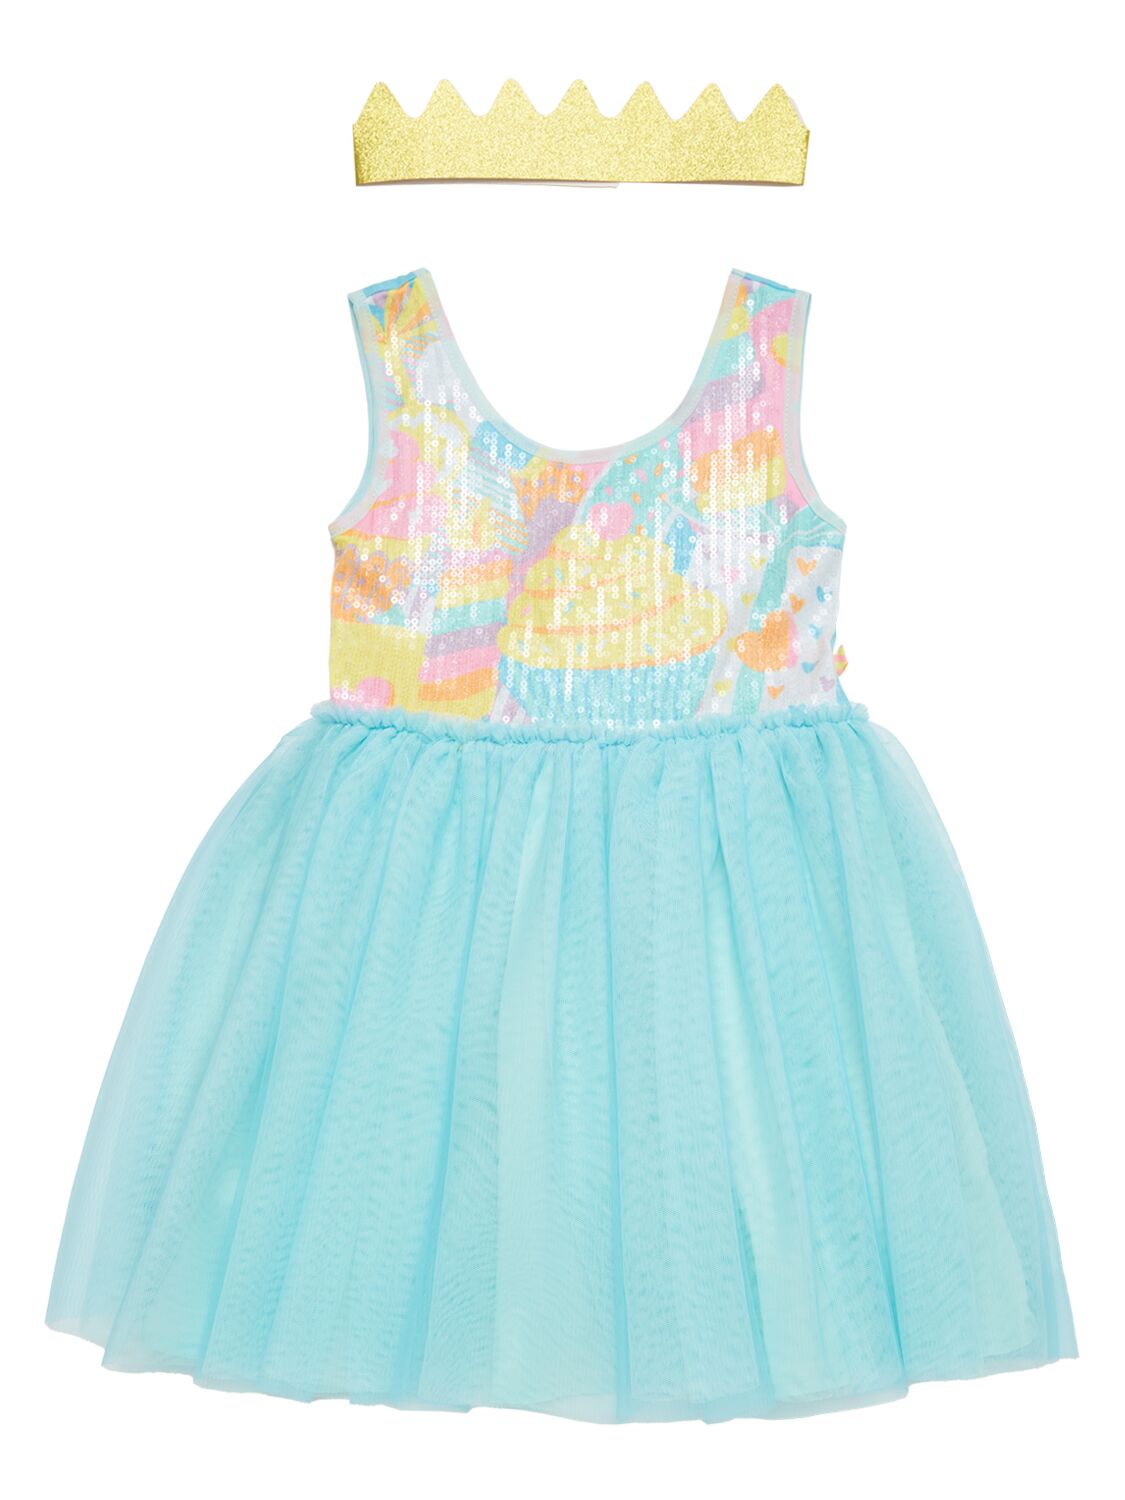 Billieblush Kids' Sequined Tulle Dress W/ Glittered Crown In Blue Leave